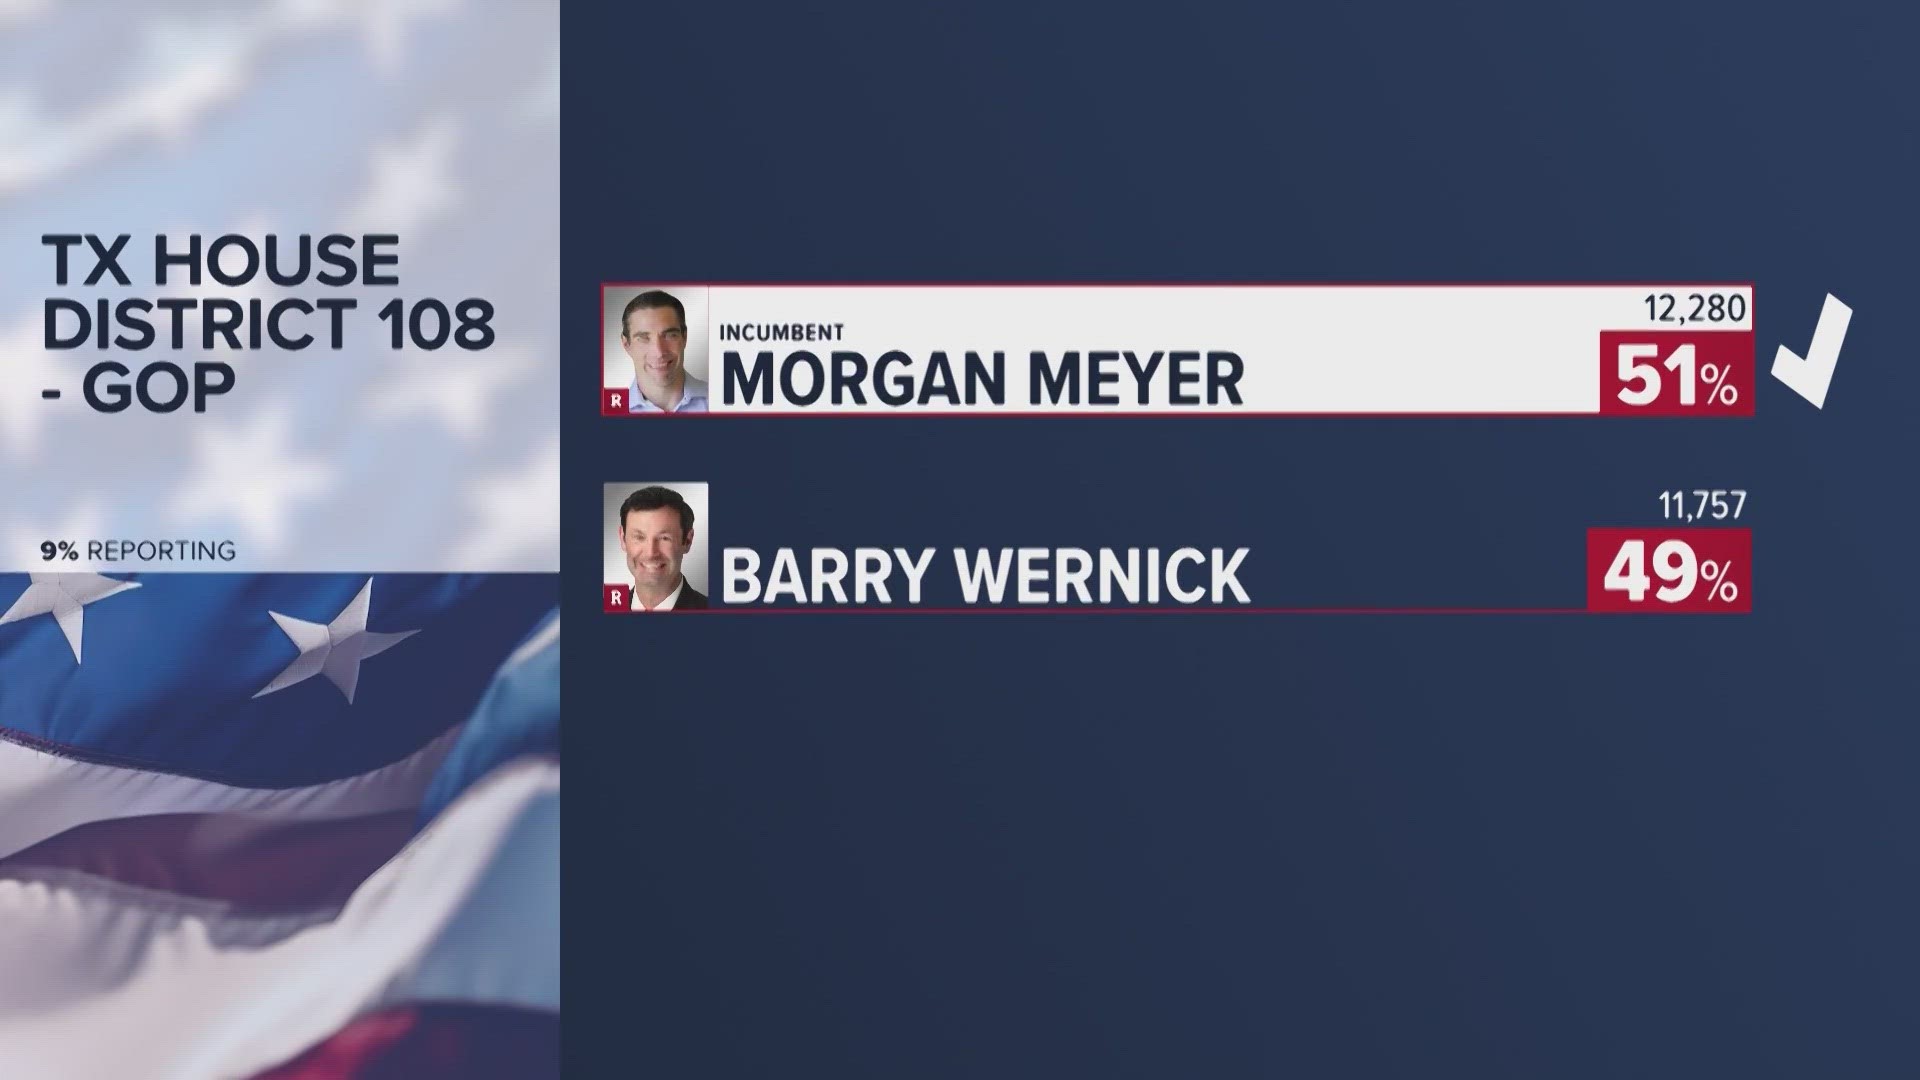 Meyer earned 51% of the vote to Barry Wernick's 49%. House District 108 includes parts of Dallas and University Park.